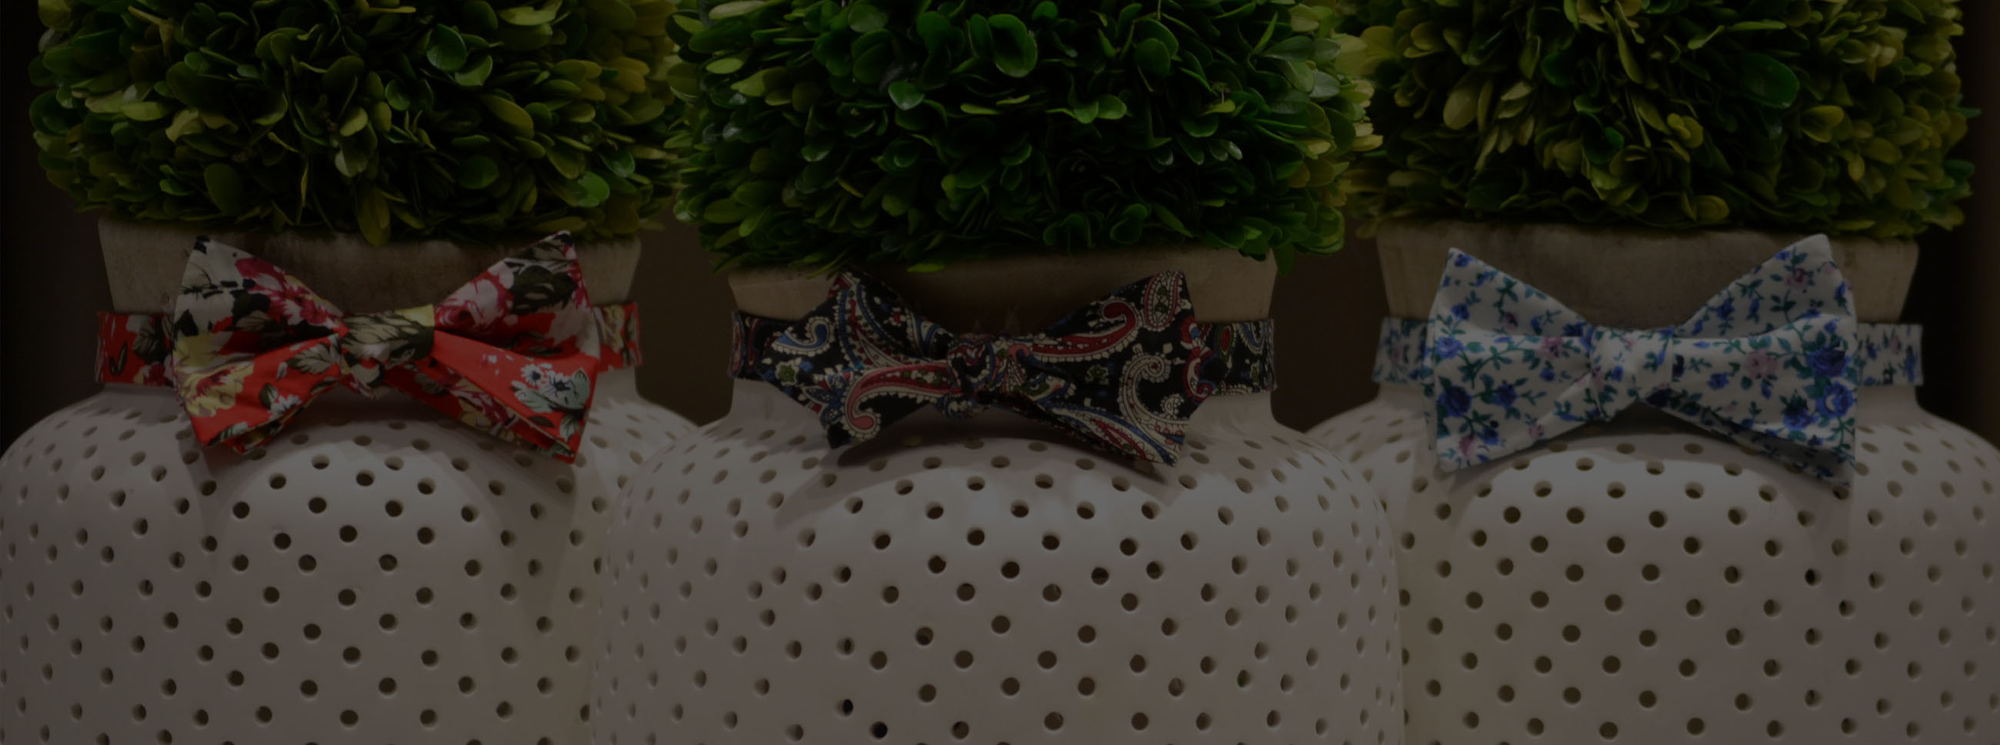 floral self tie bow ties collection